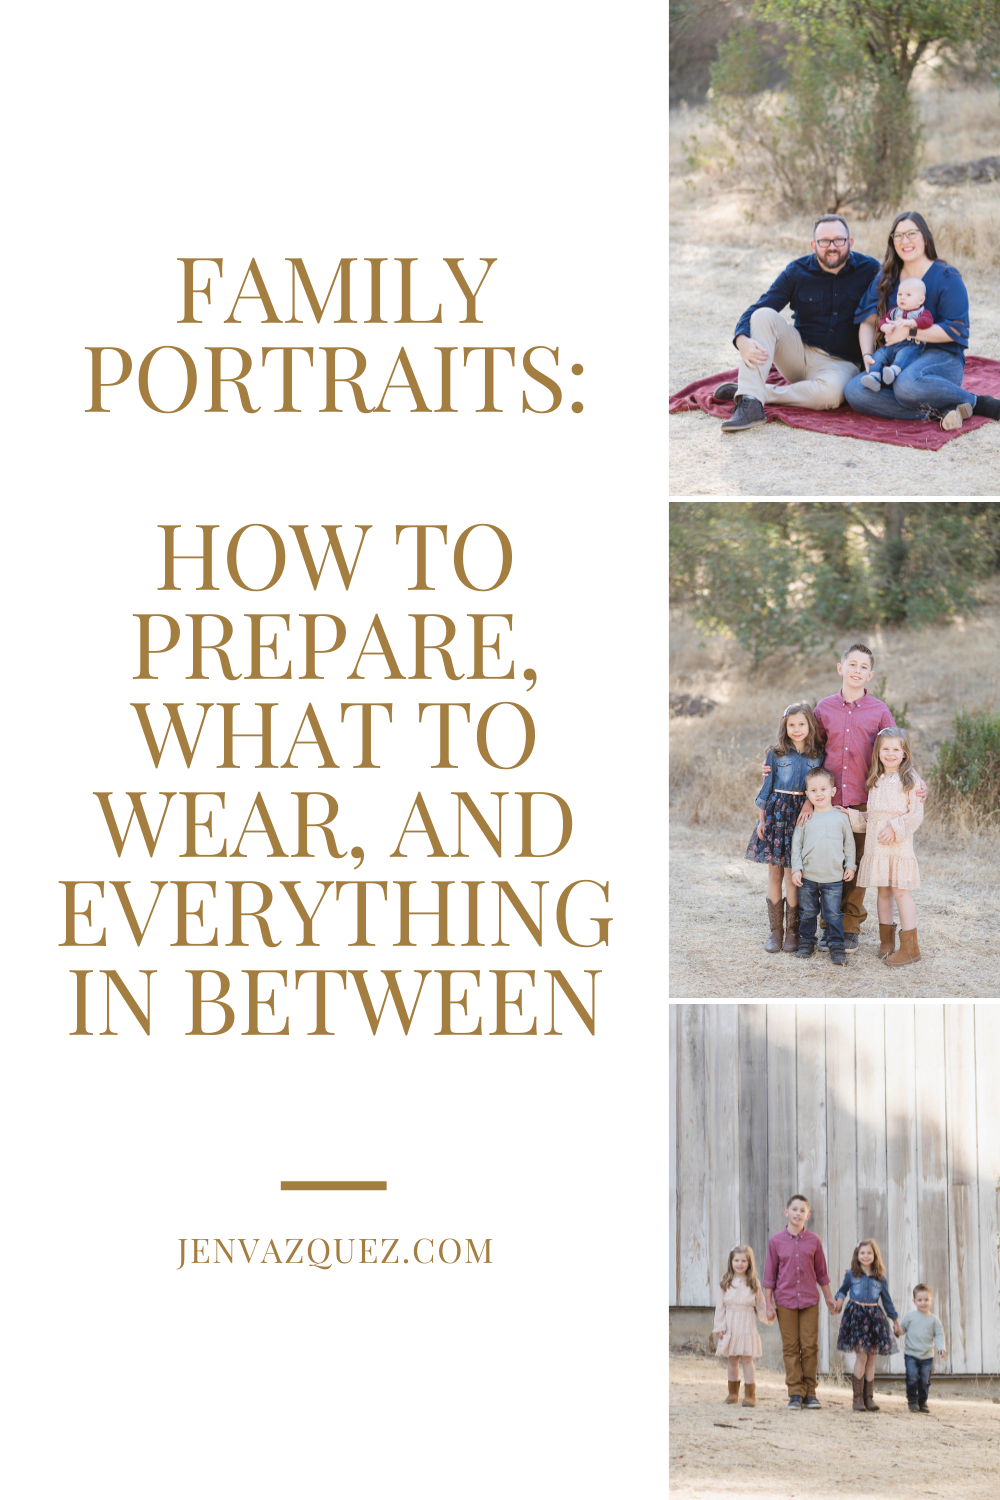 What to Wear and how to prepare for family portraits